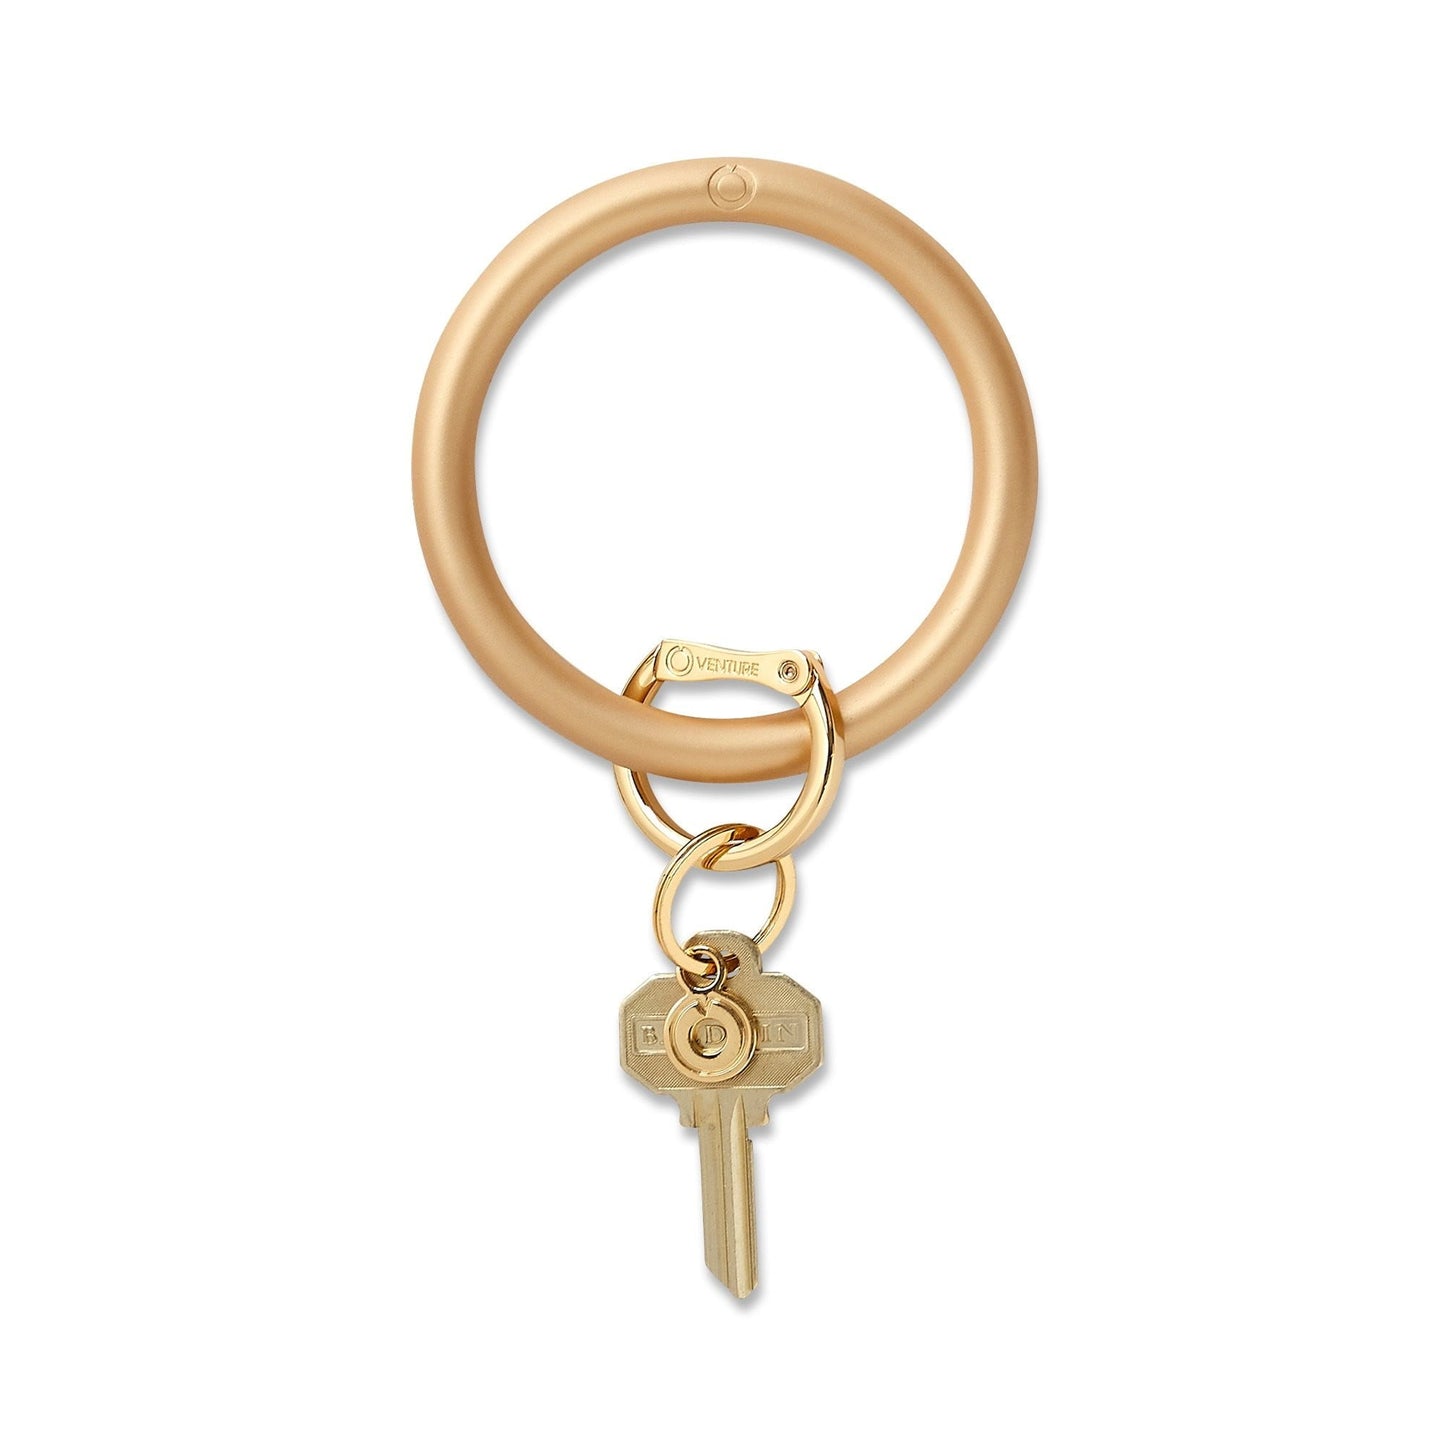 O-Venture Silicone Pearlized Key Ring